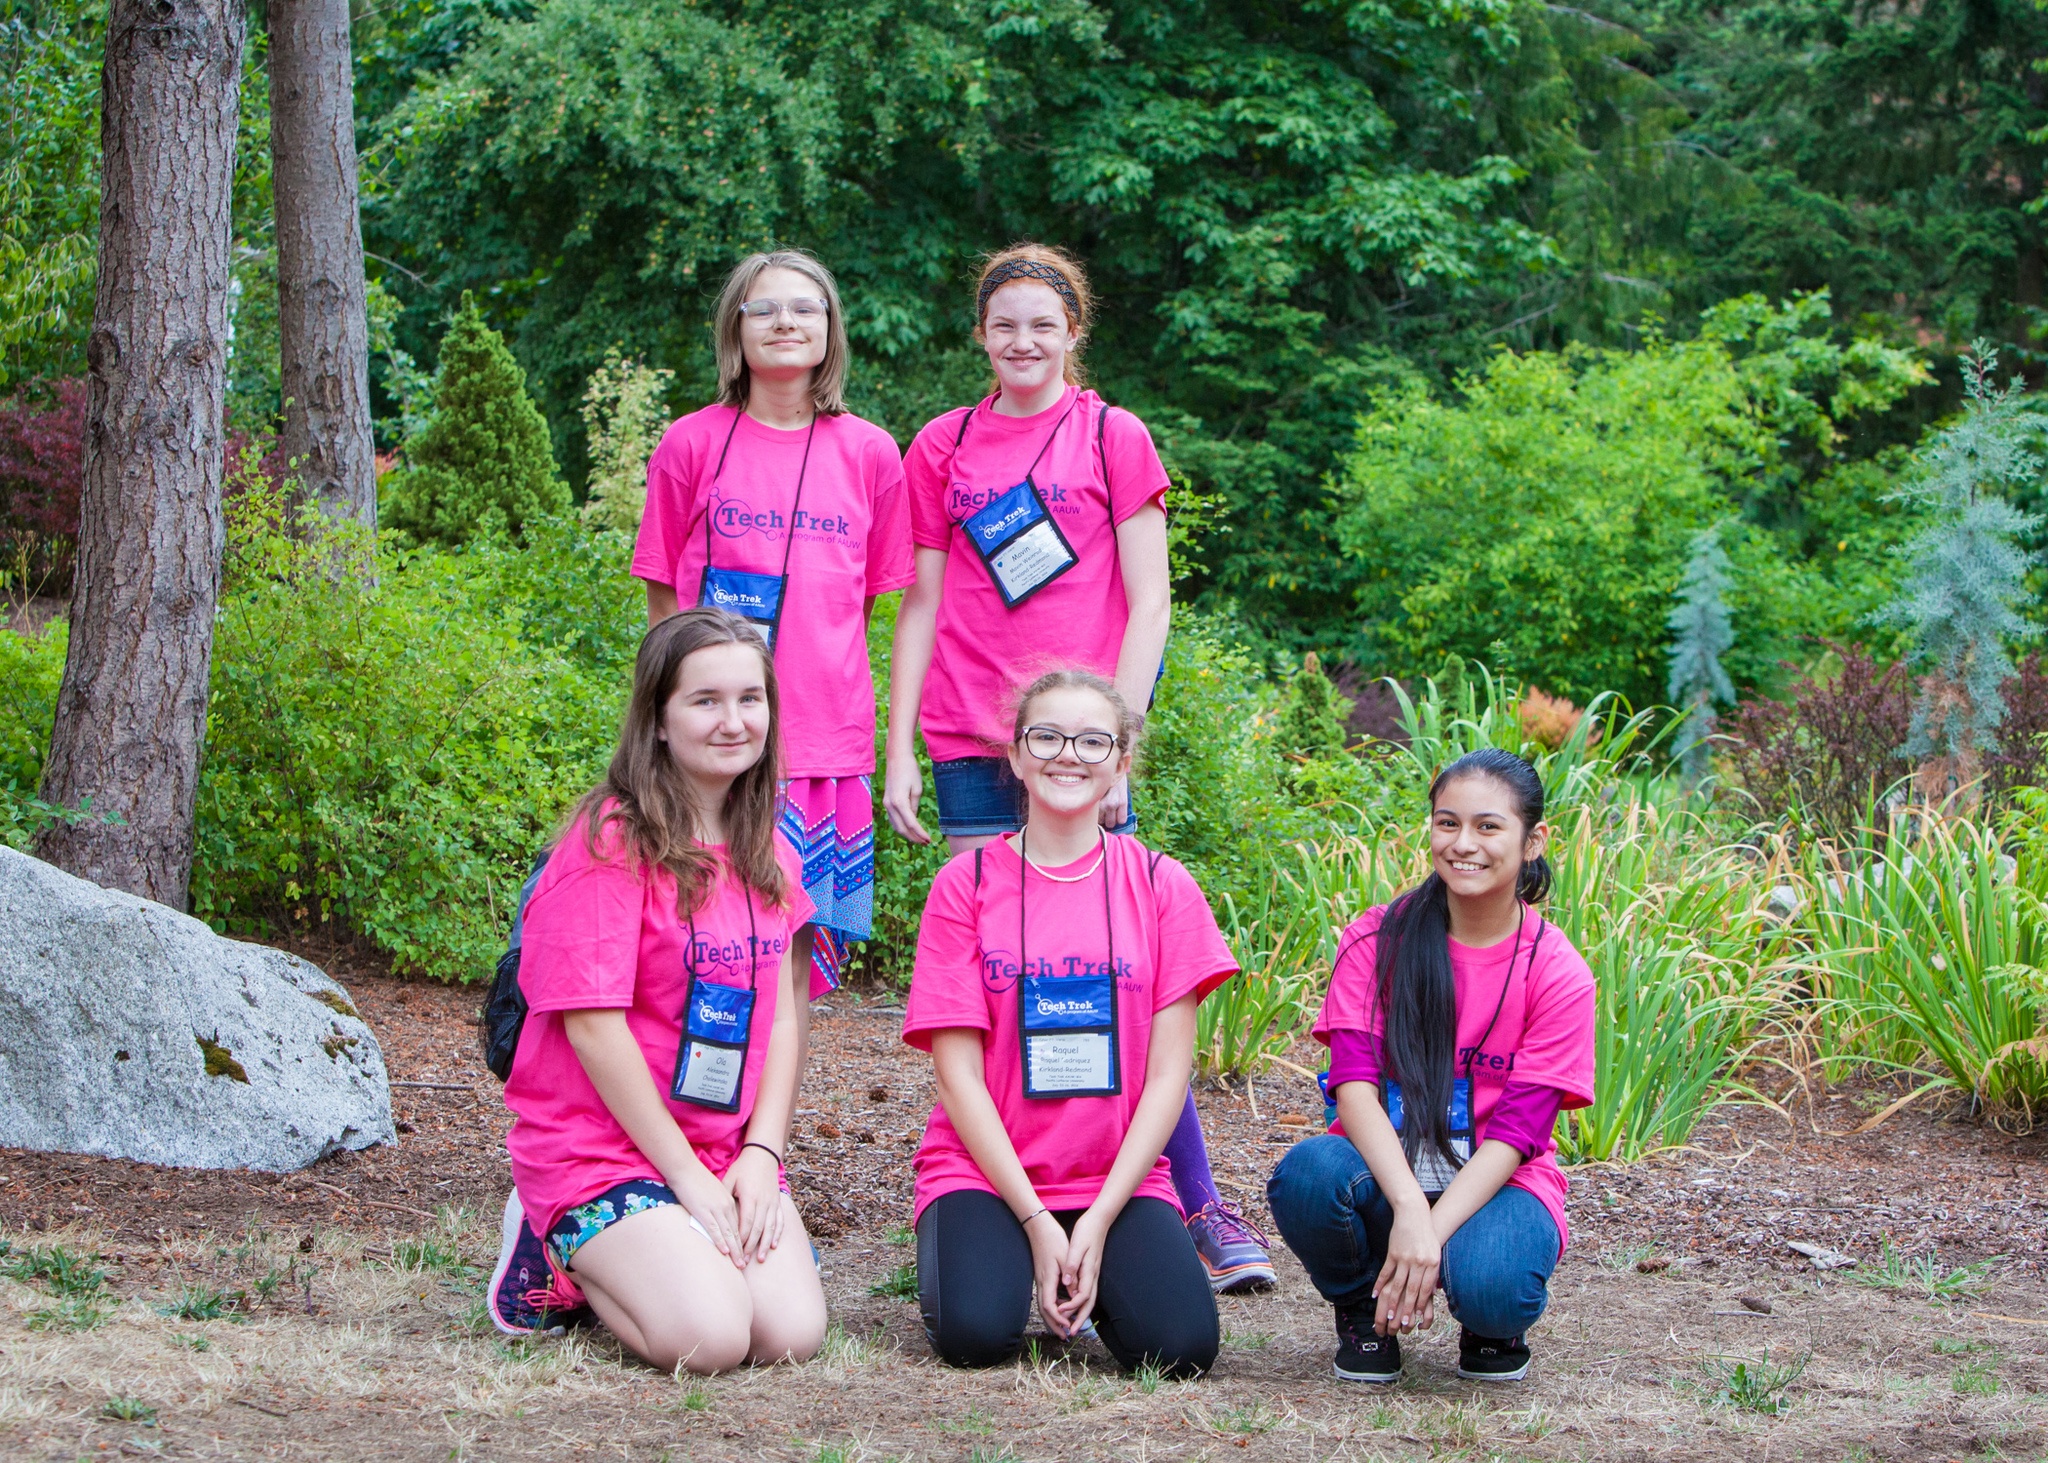 American Association of University Women STEM camp participants included